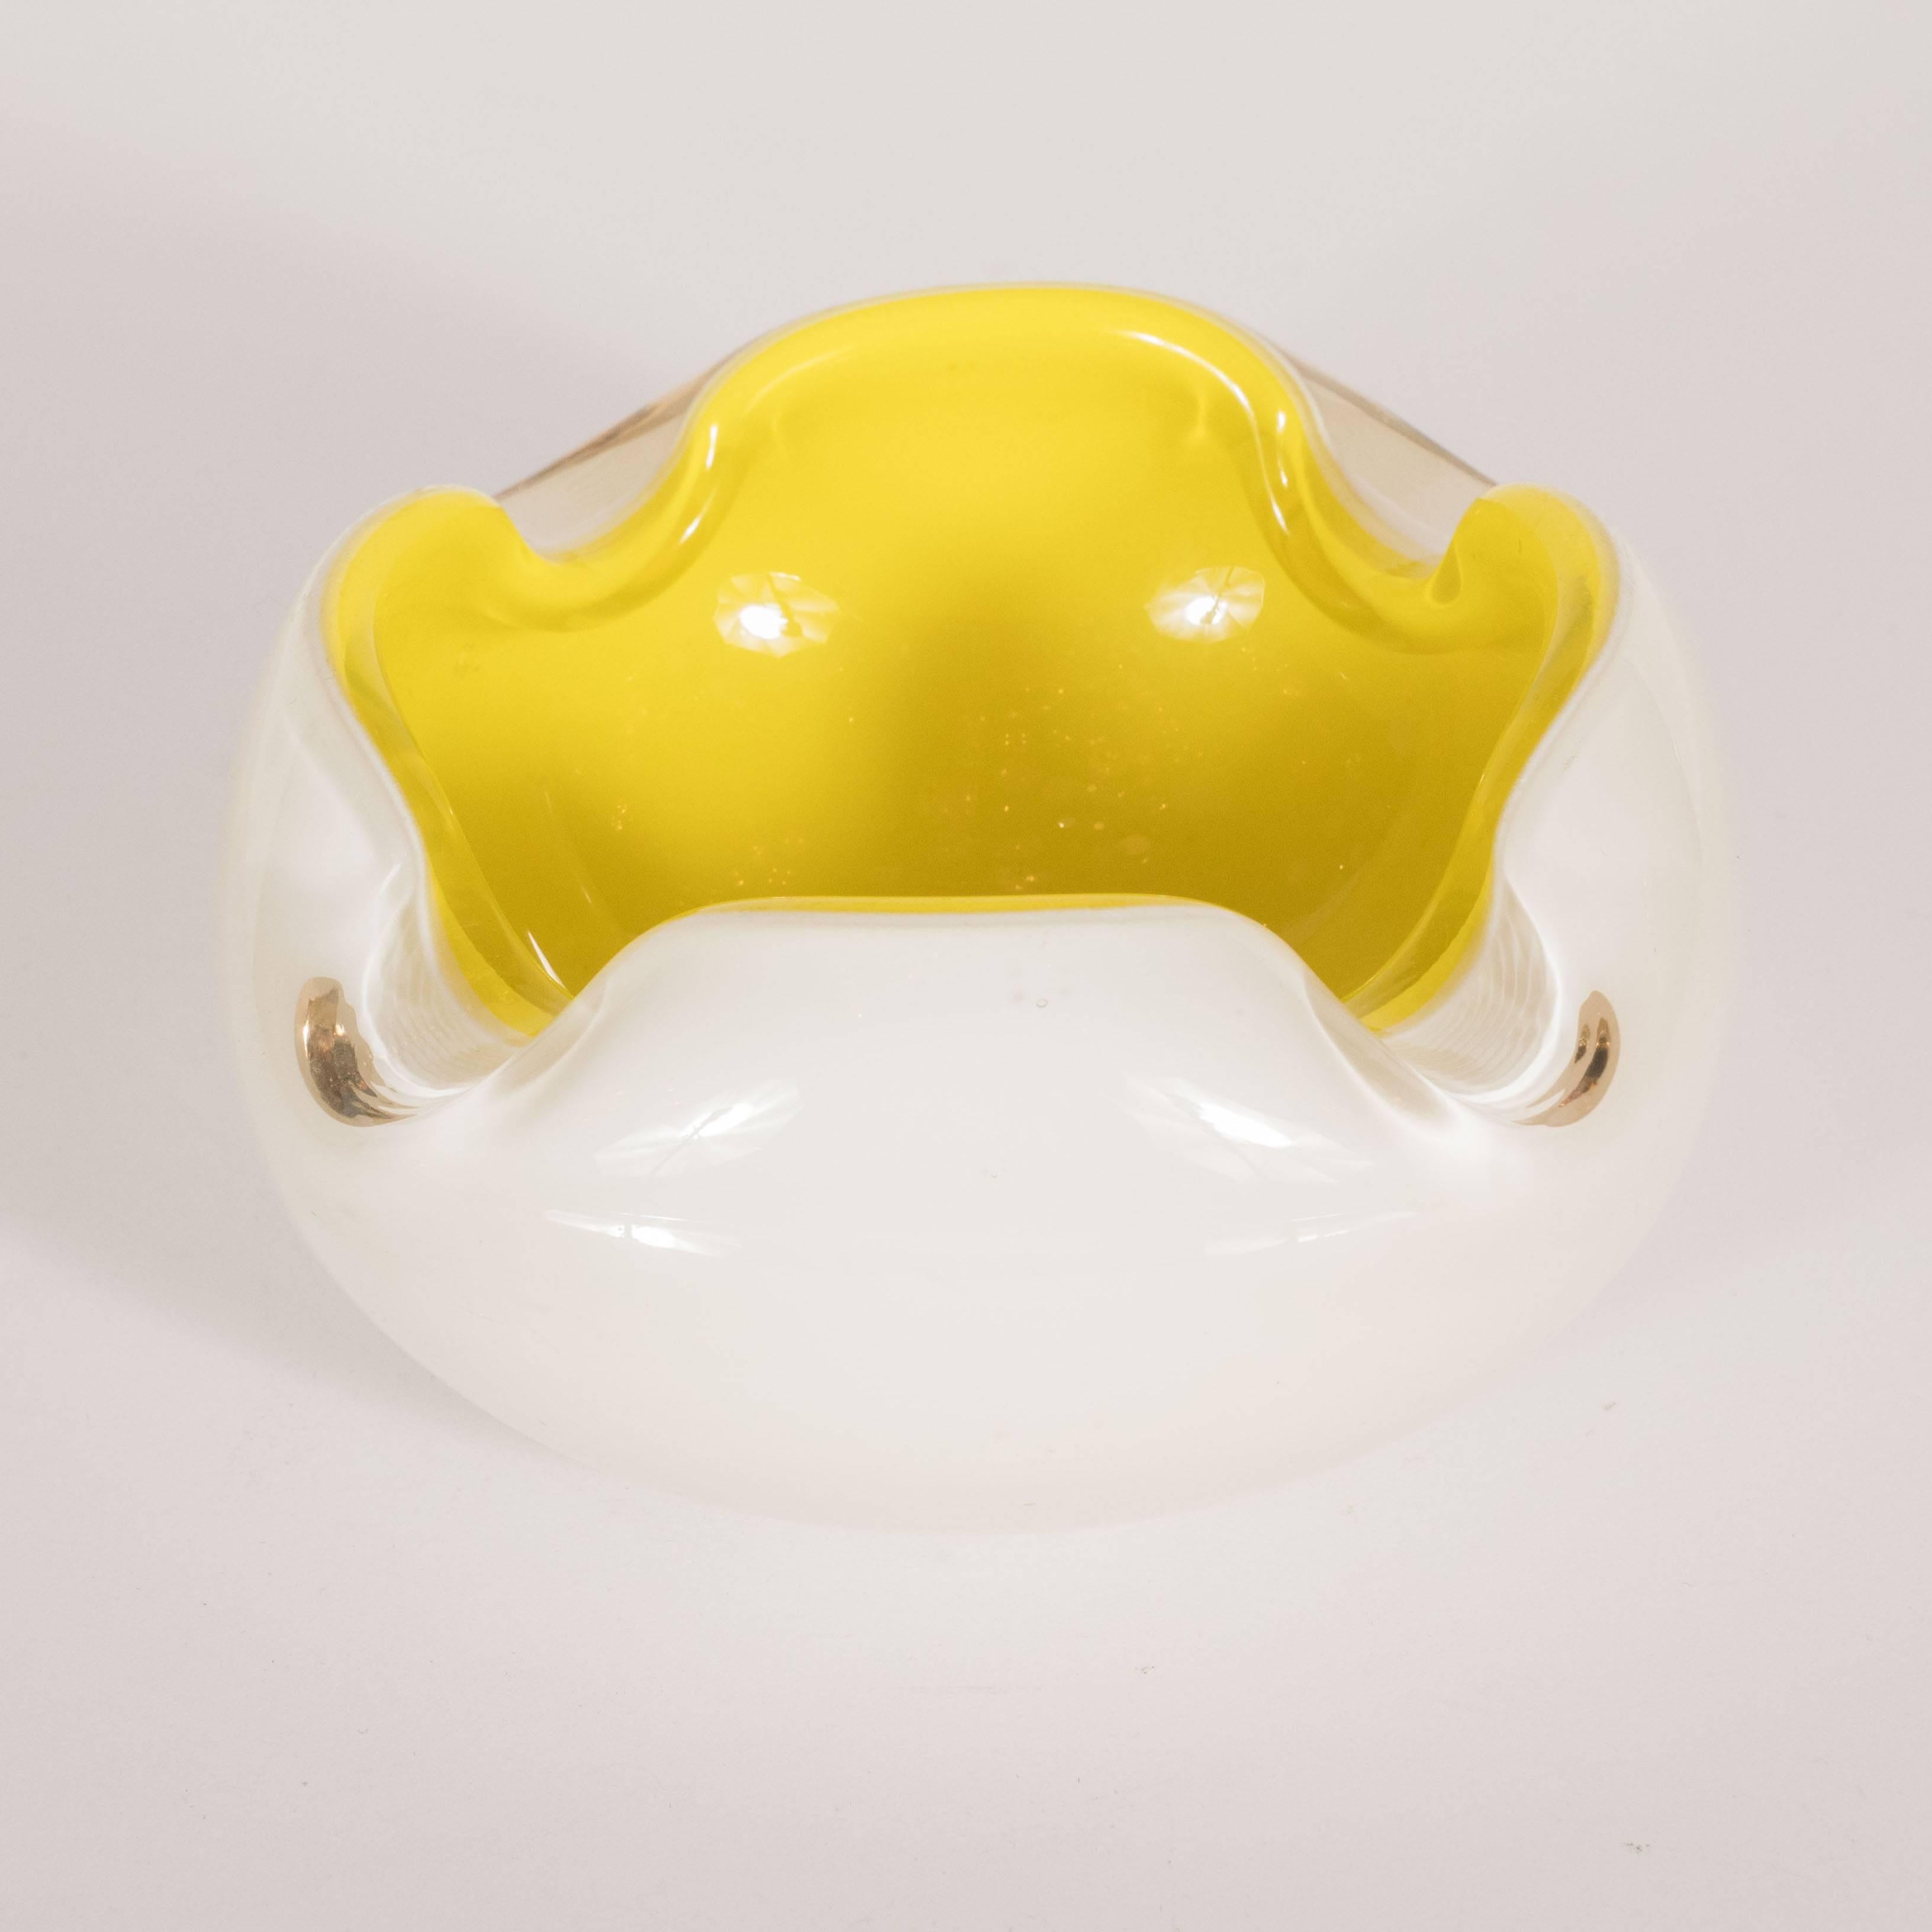 This stunning Mid-Century Modern dish features a white opaque skein and an ebullient lemon yellow interior with four depressions around the rim, imbuing the silhouette with dynamic sinuous curves. It would be perfect for presenting candies or nuts,